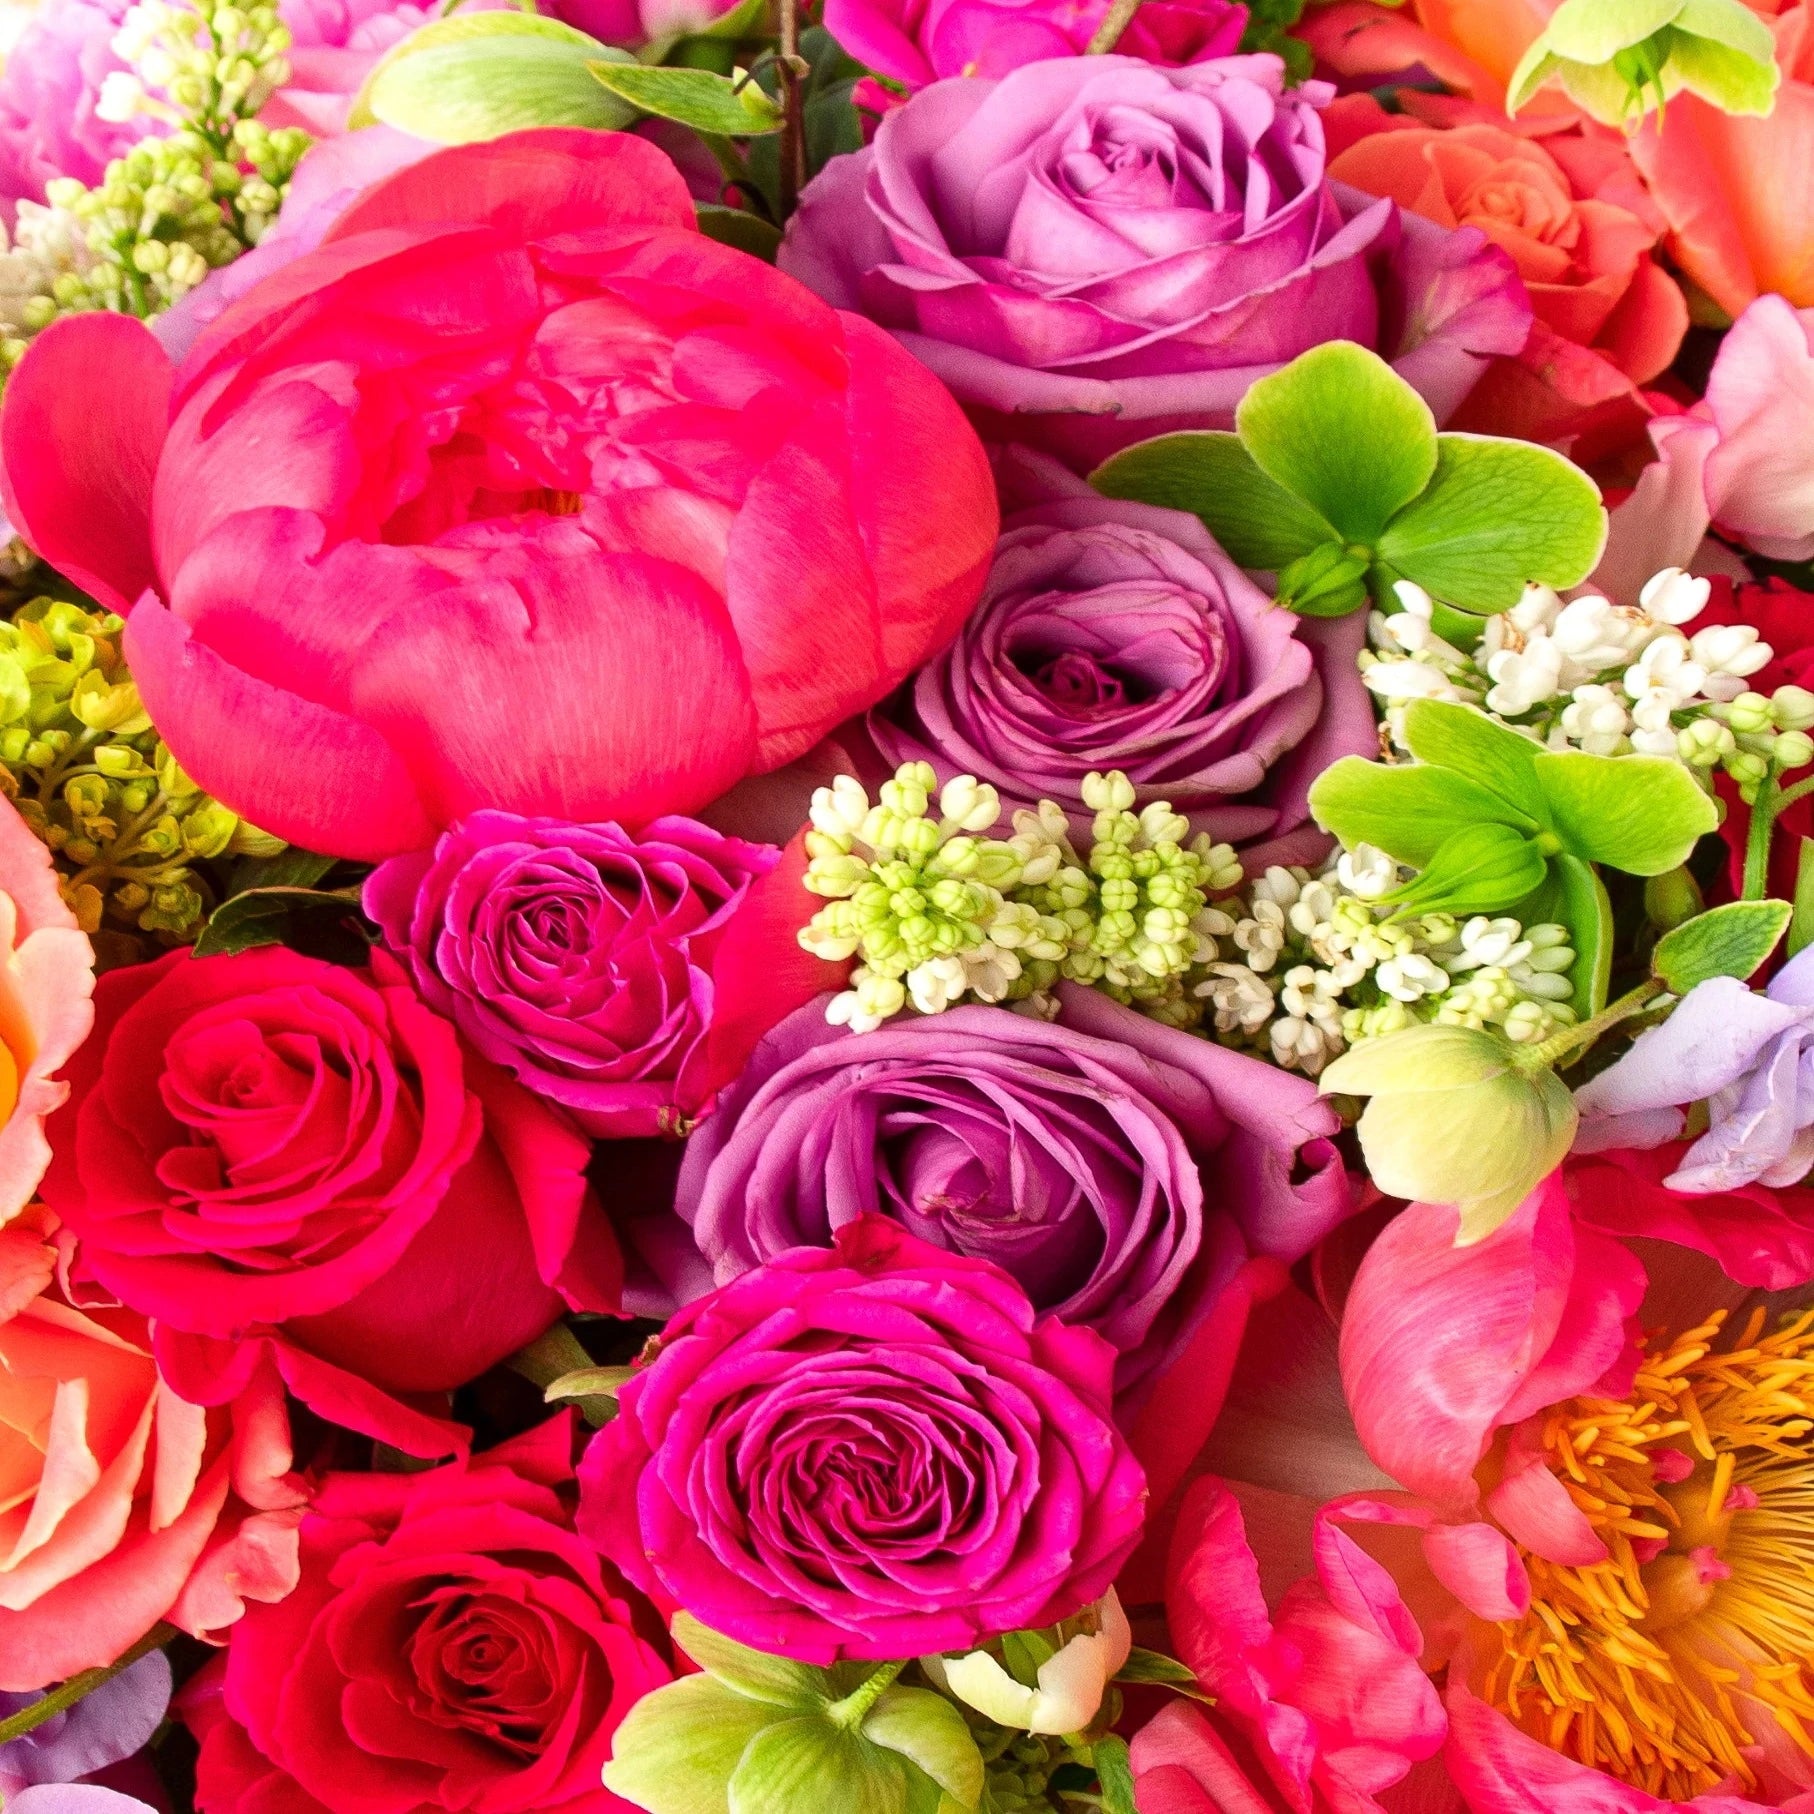 Allow our florists to select the finest and freshest spring flowers for your arrangement, which includes peonies. Colors and flowers will vary depending on what's available at the market.  NOTE: Blooms are delivered in a vase.